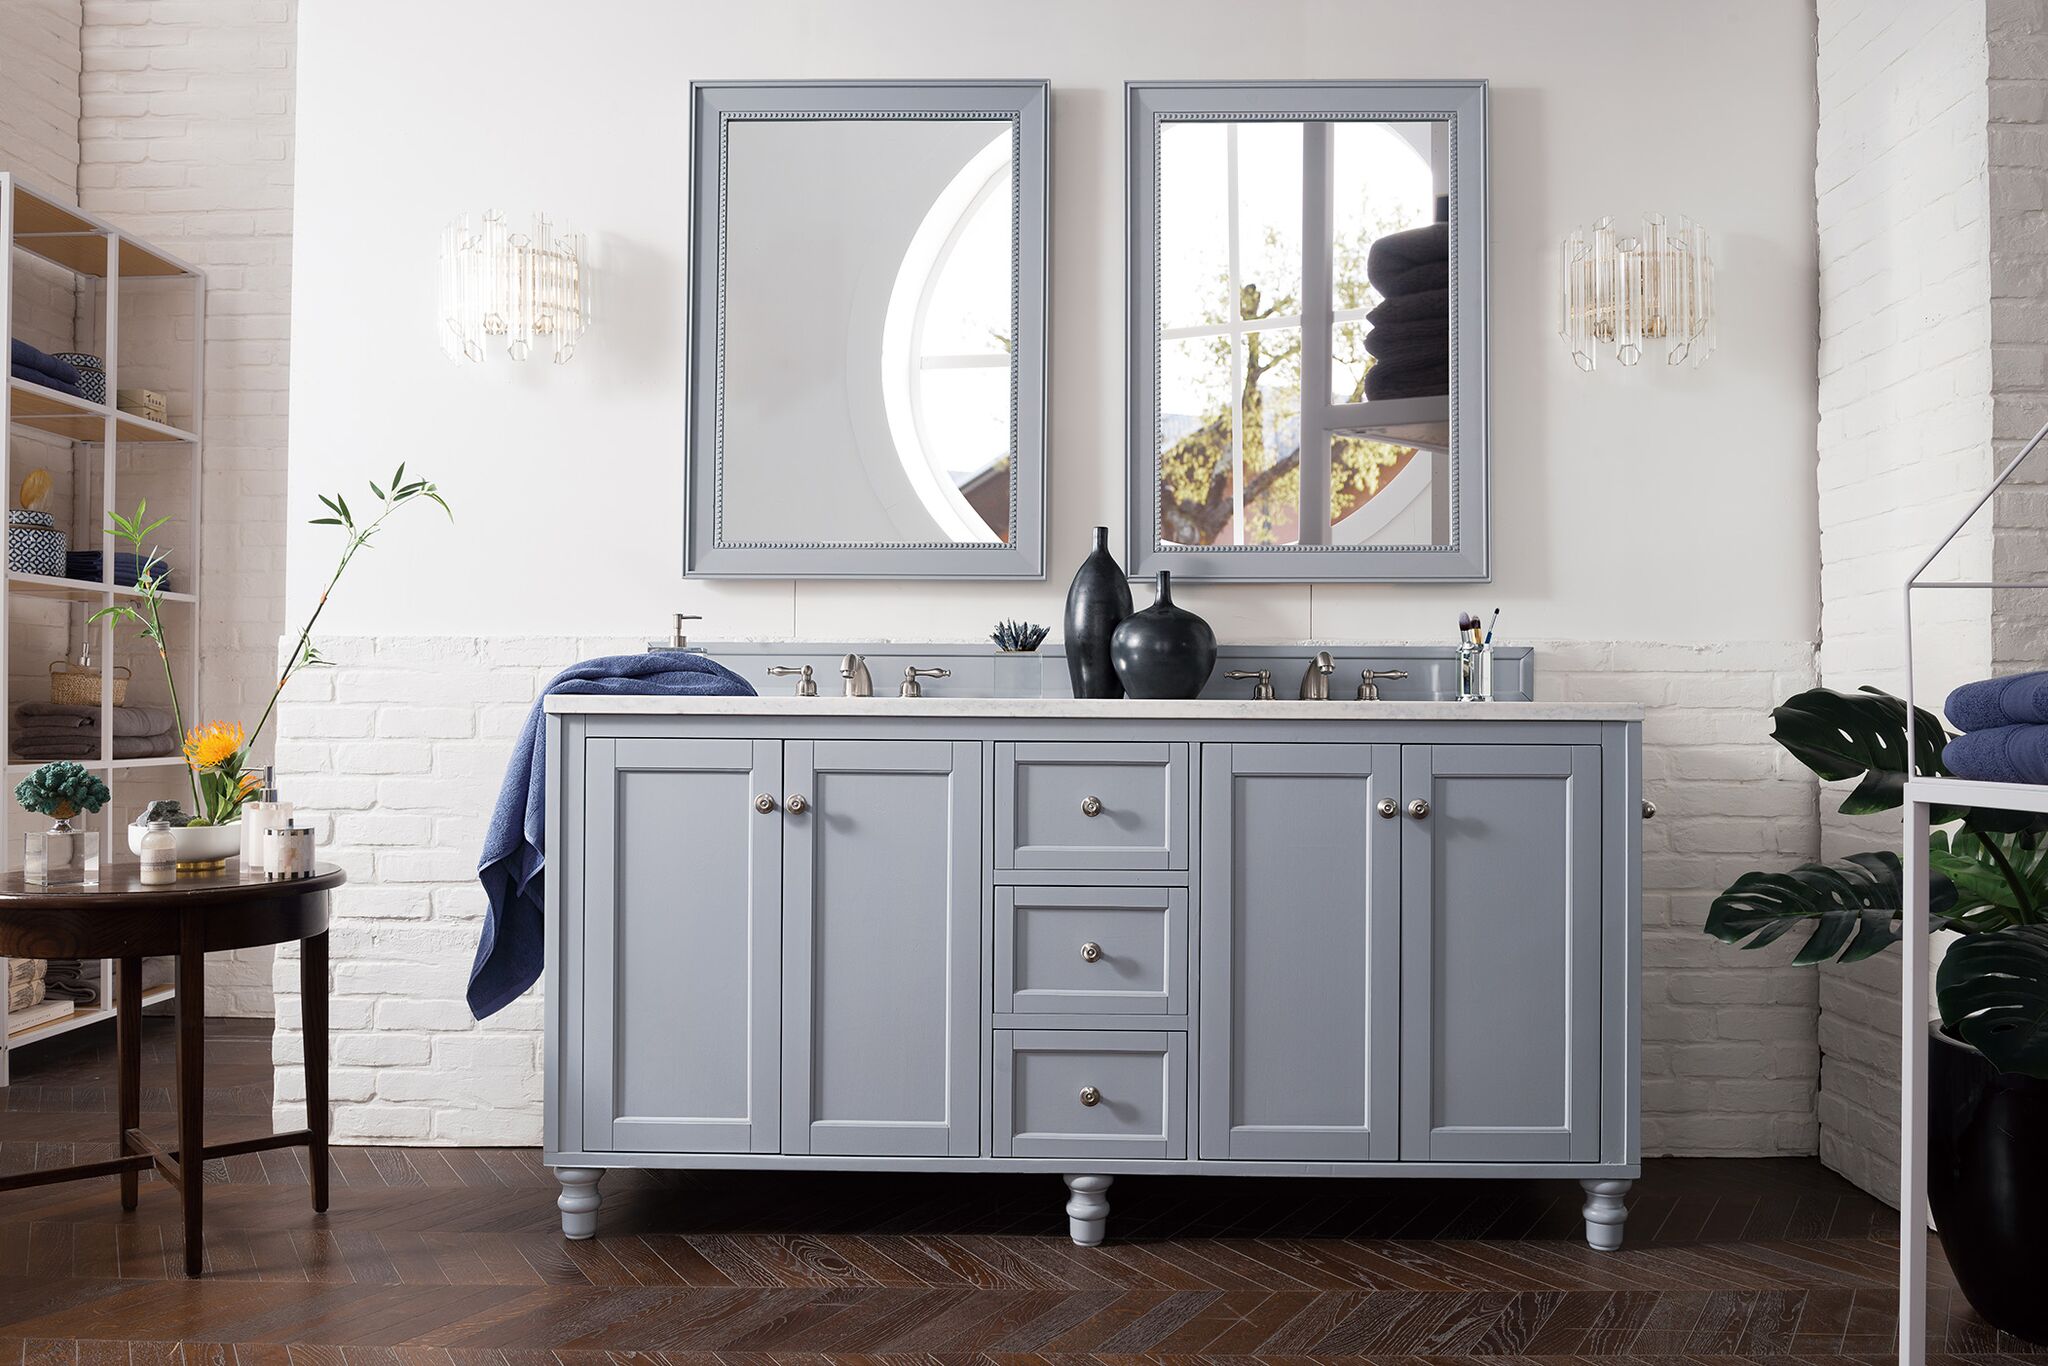 Vanity Sink Cabinets in Indianapolis at discount prices